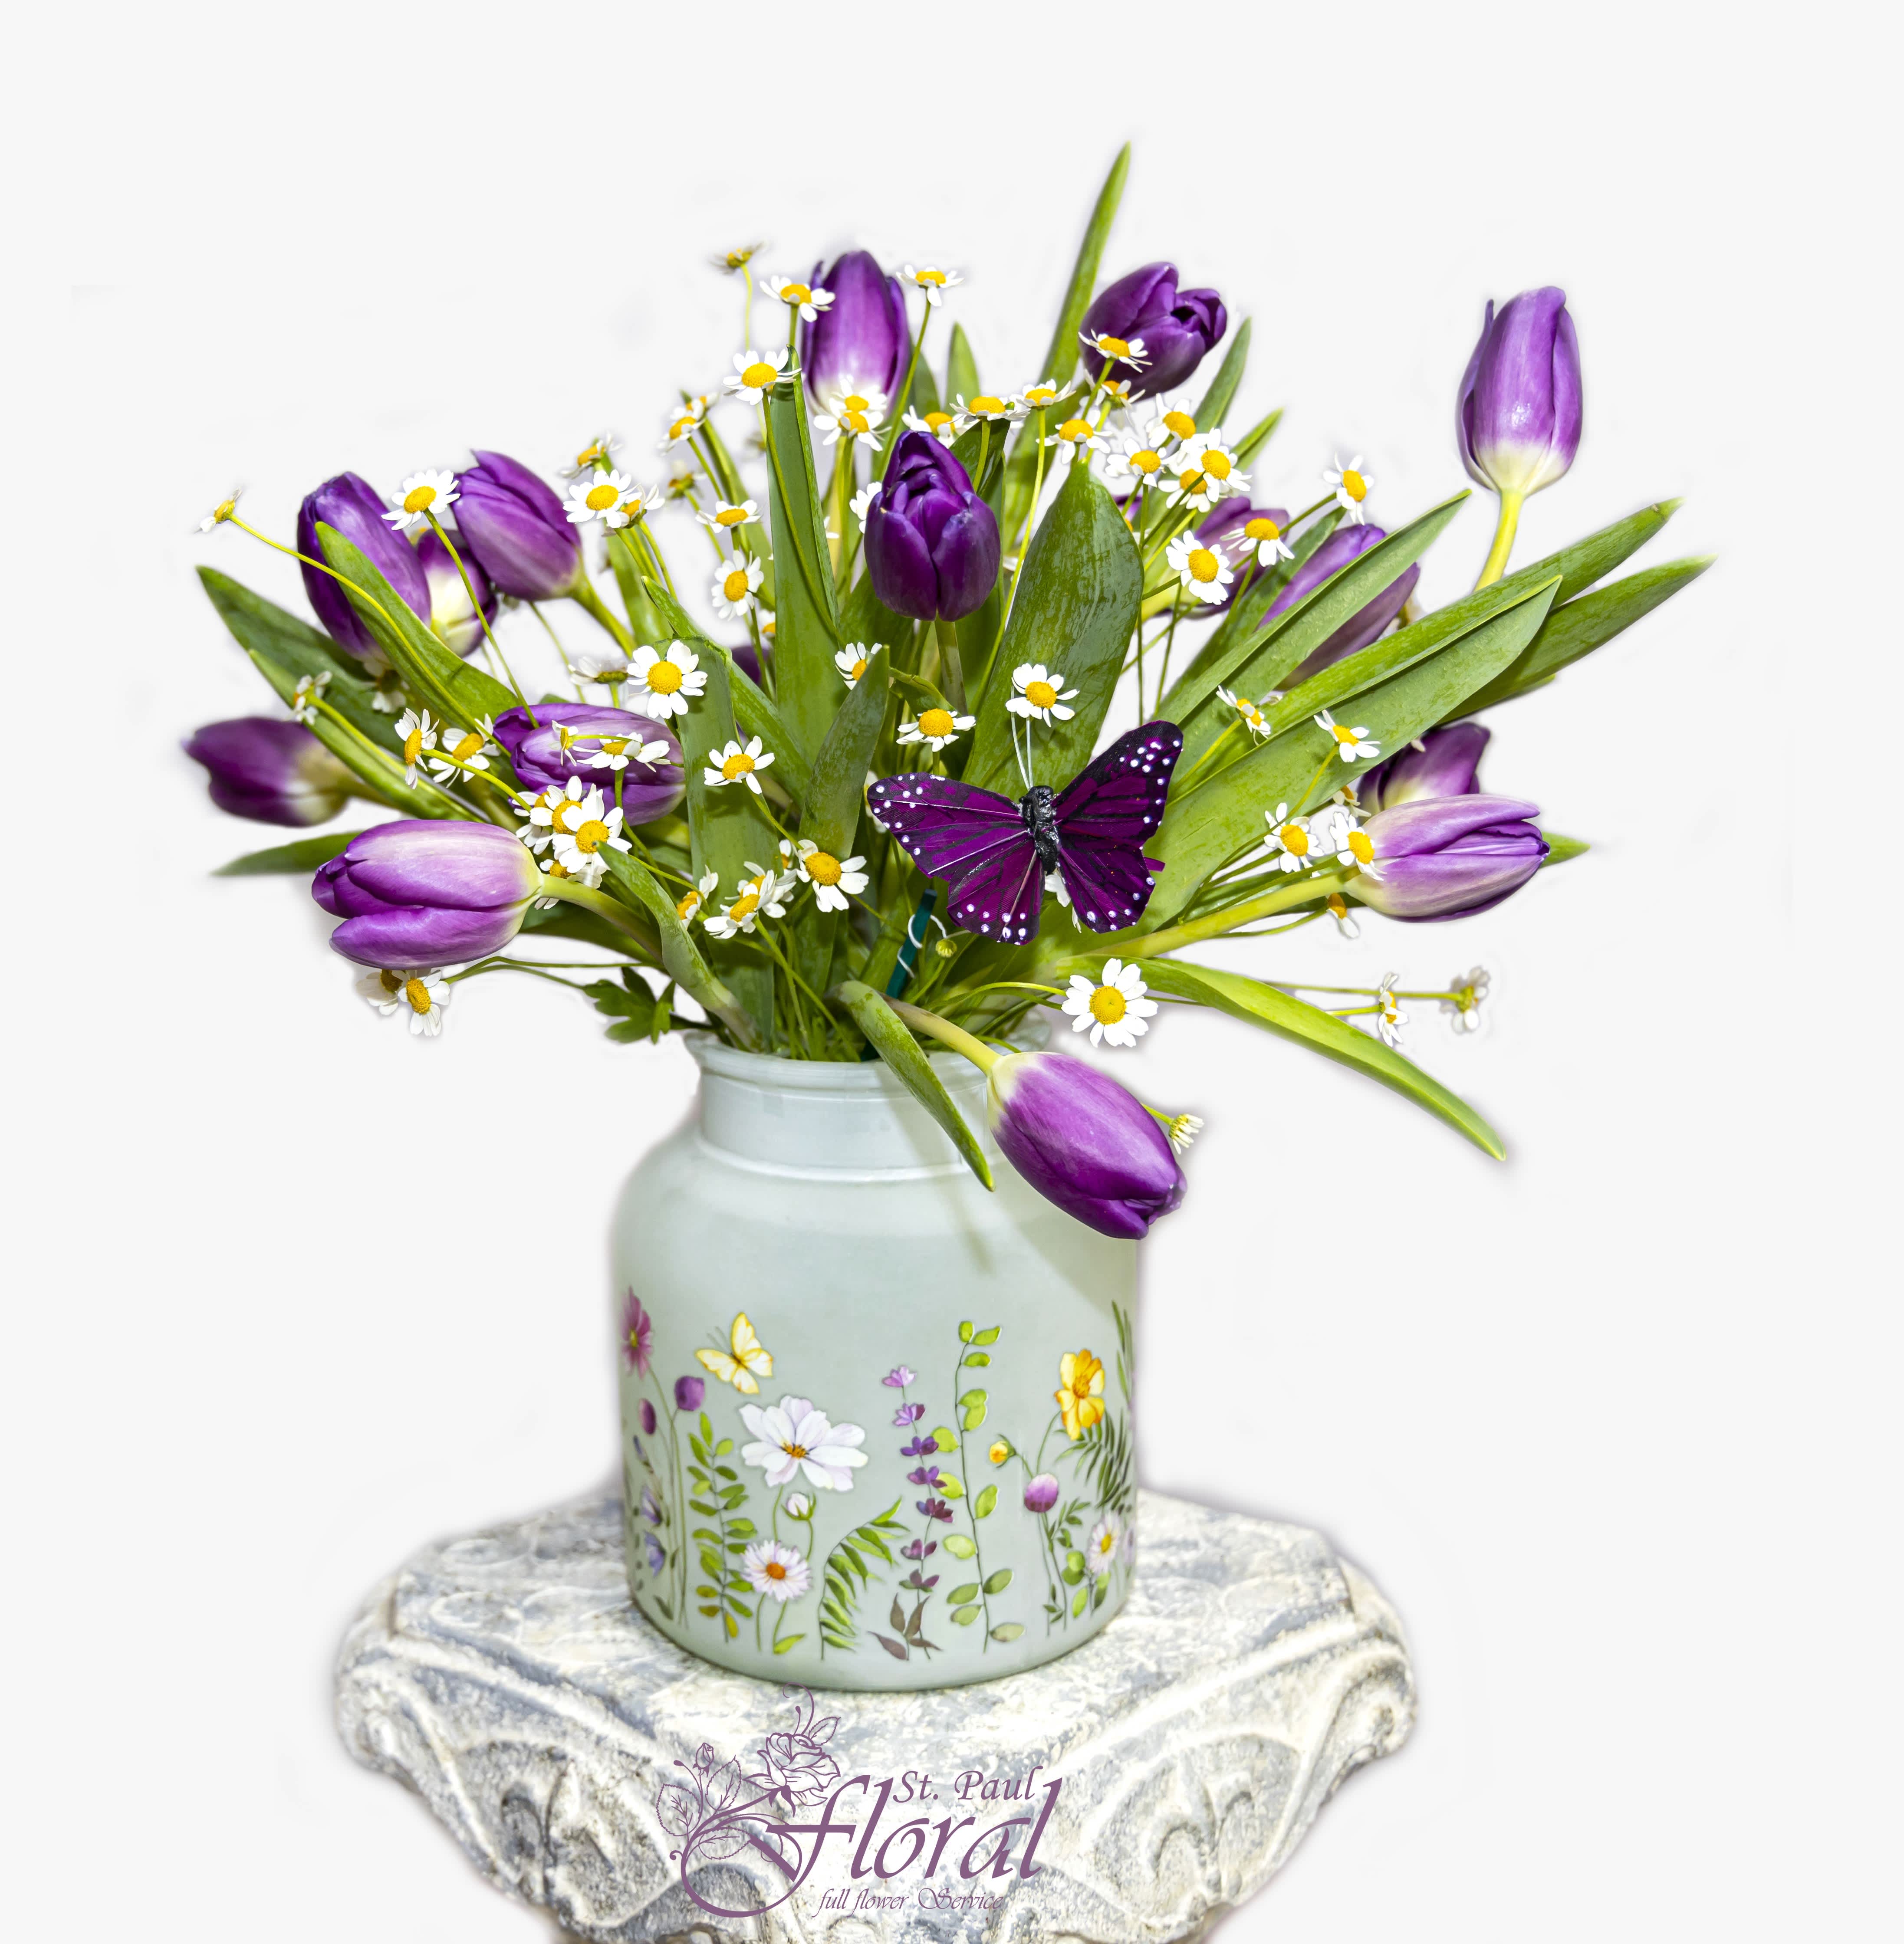 Spring Solstice - When you think of Tulips, what does it remind you? This vibrant purple Tulips will remind you of Spring, contrasting with Feverfew arranged in a Spring pattern vase.